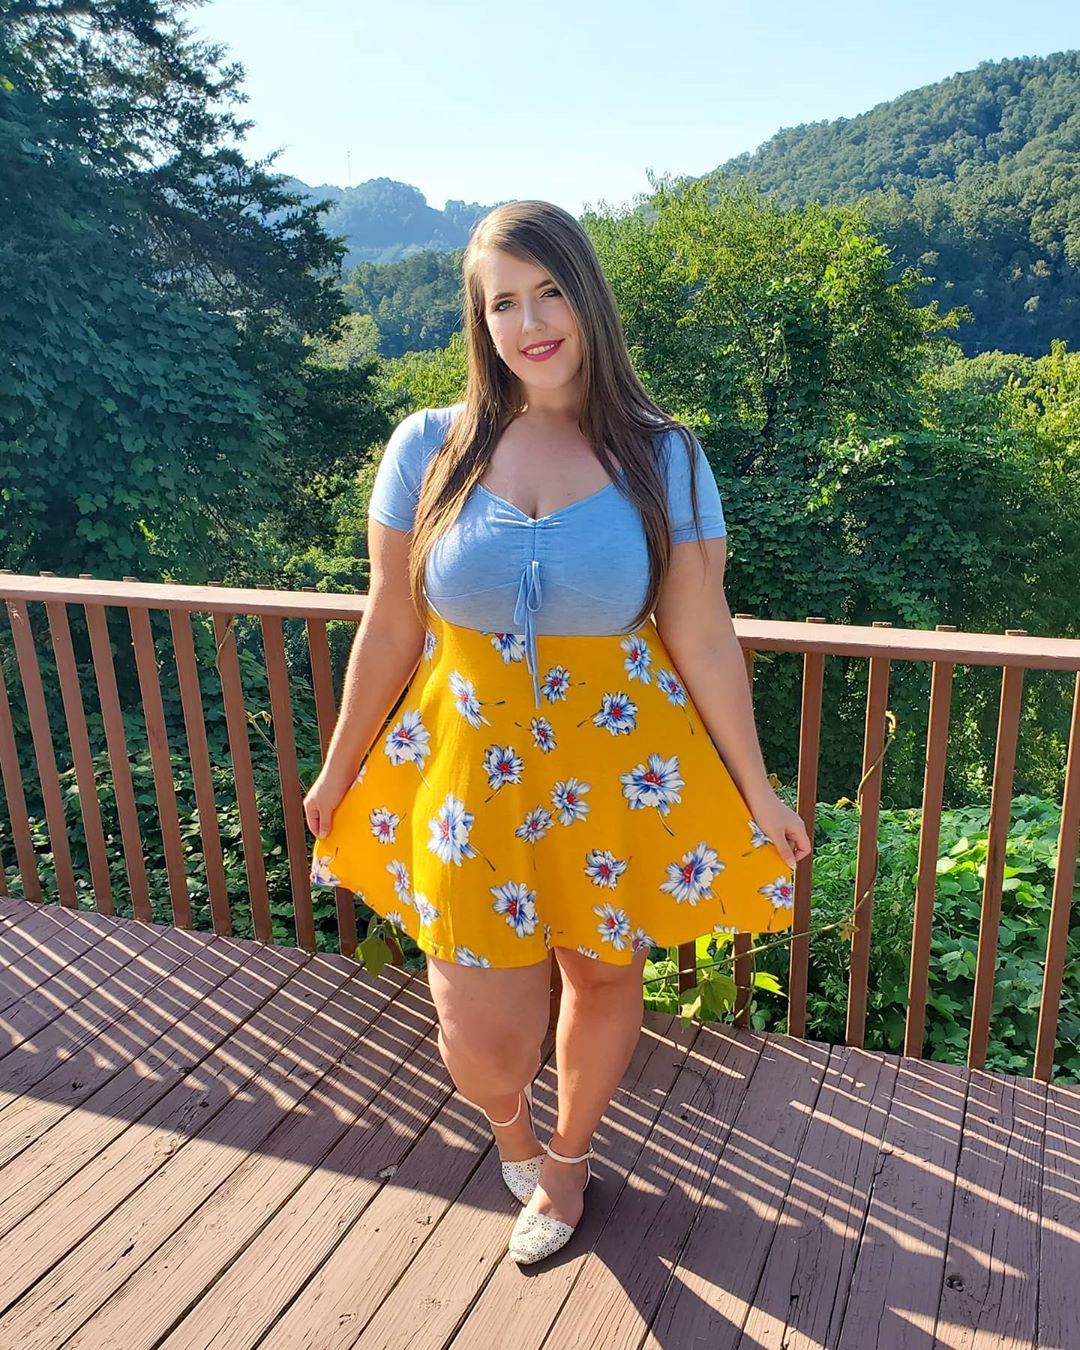 Dresslily - "I used to never wear yellow...now it's one of my favorite colors to wear"🌼⁣
💕Pict by @hollylindsey_⁣
👉Search: "Floral Print Knot Front Chiffon Dress"⁣
#Dresslily